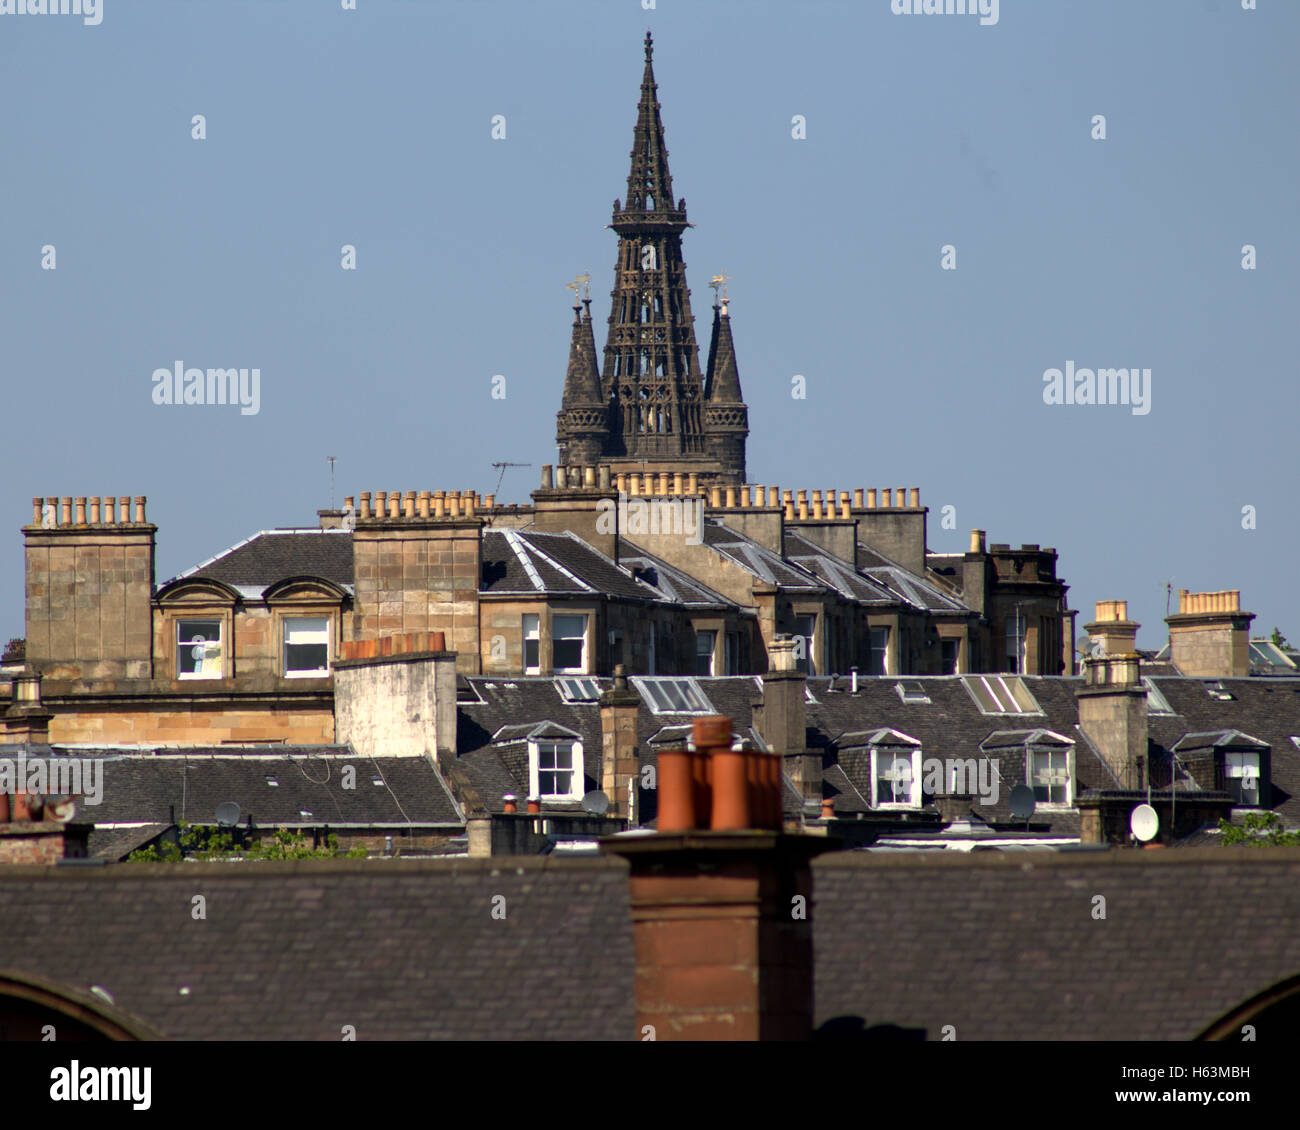 Glasgow University clock tower lording it over the rooftops and chimney pots of Glasgow Stock Photo